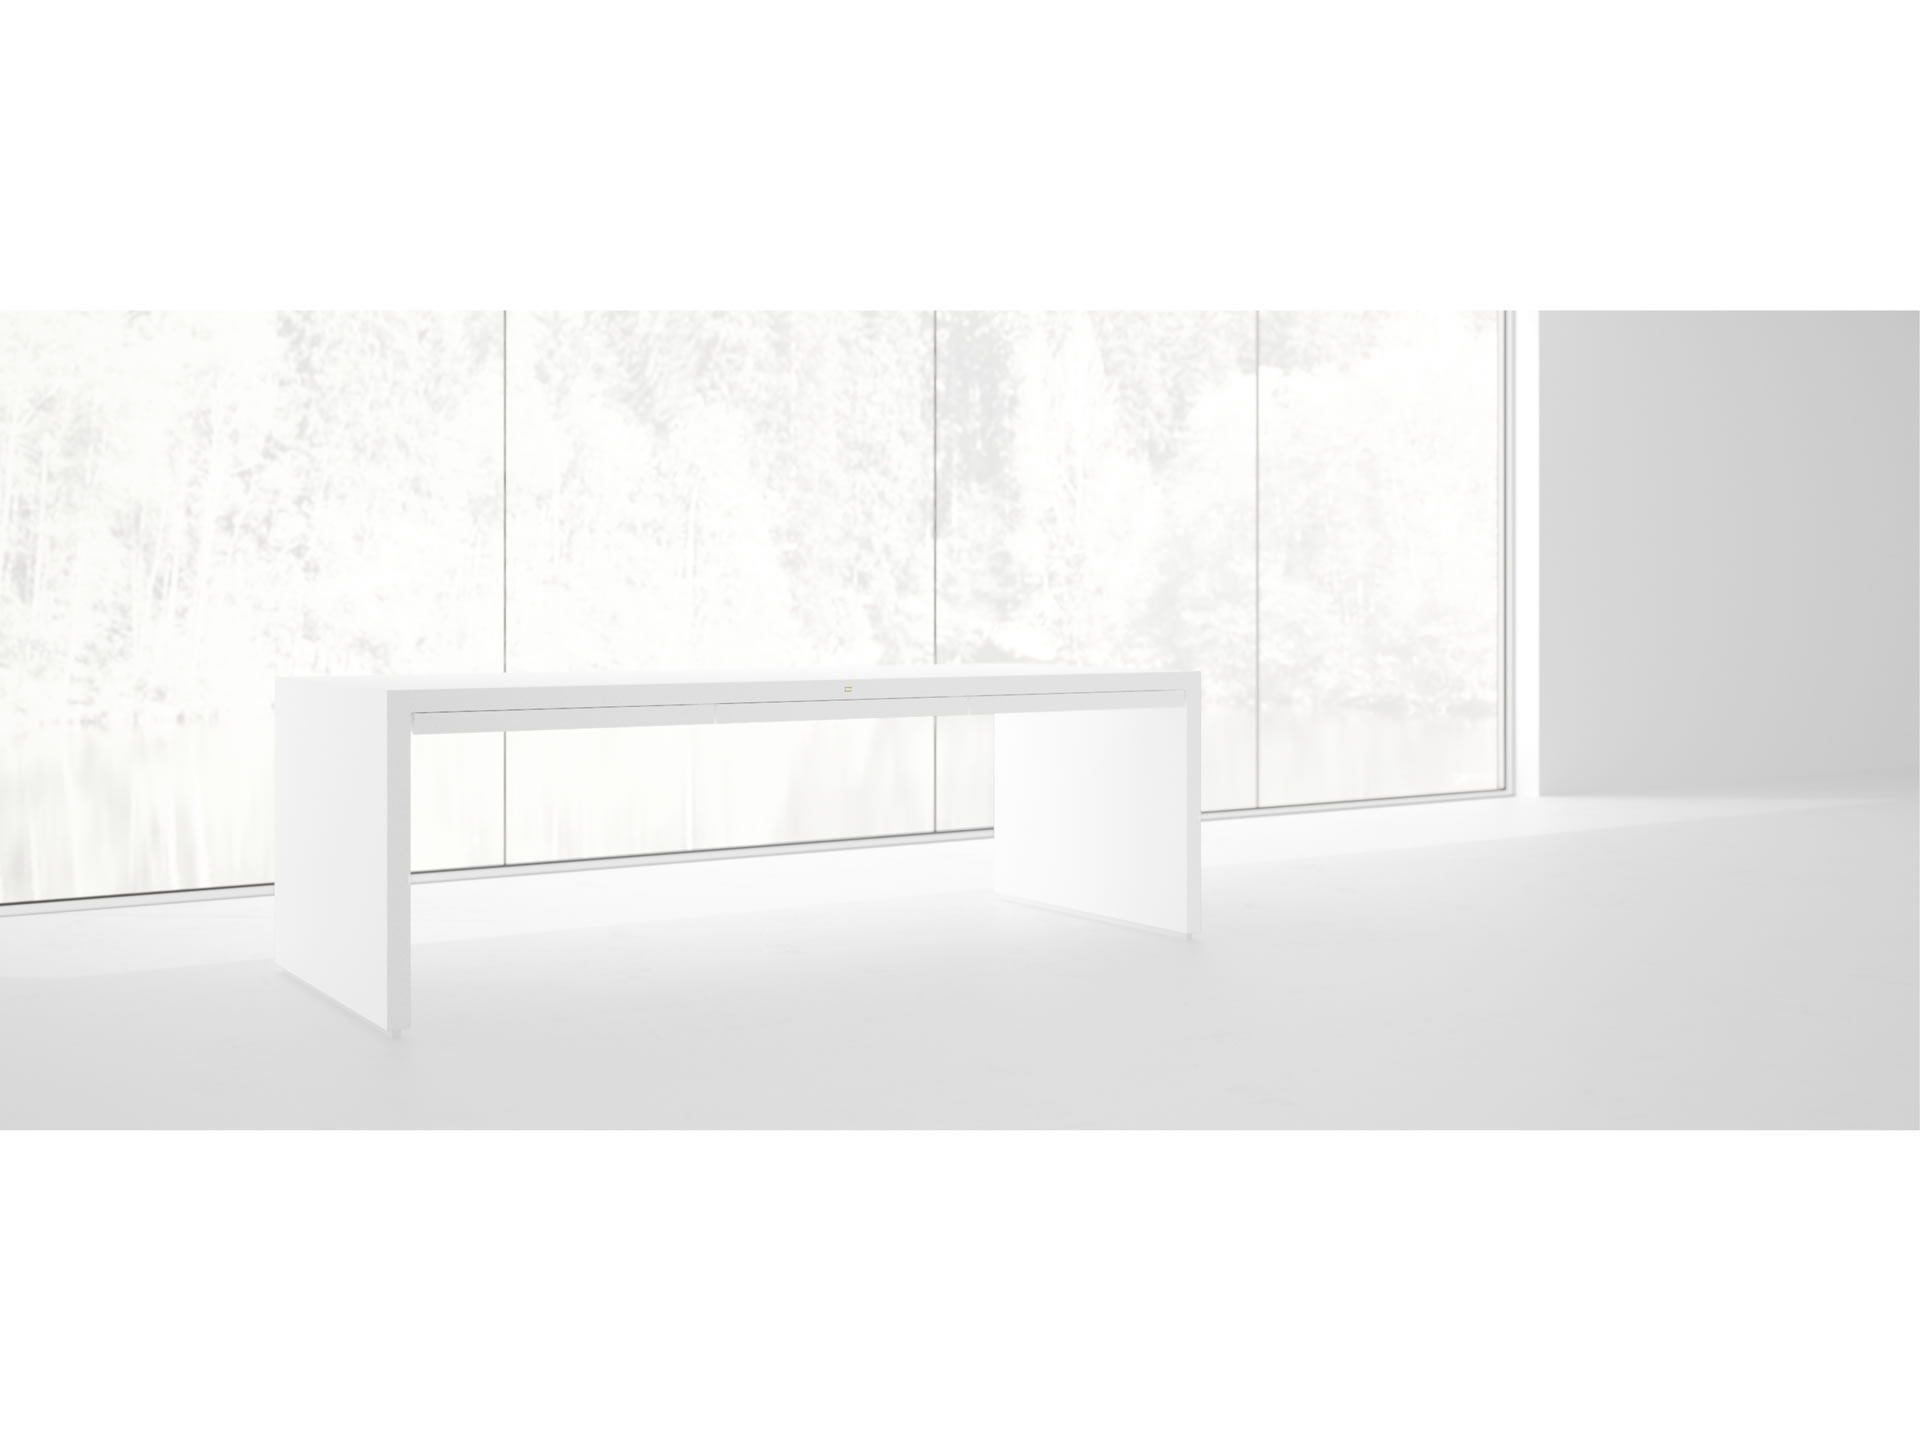 FELIX SCHWAKE TABLE I I Sublime White U Shaped Table with Closed Legs and Drawers